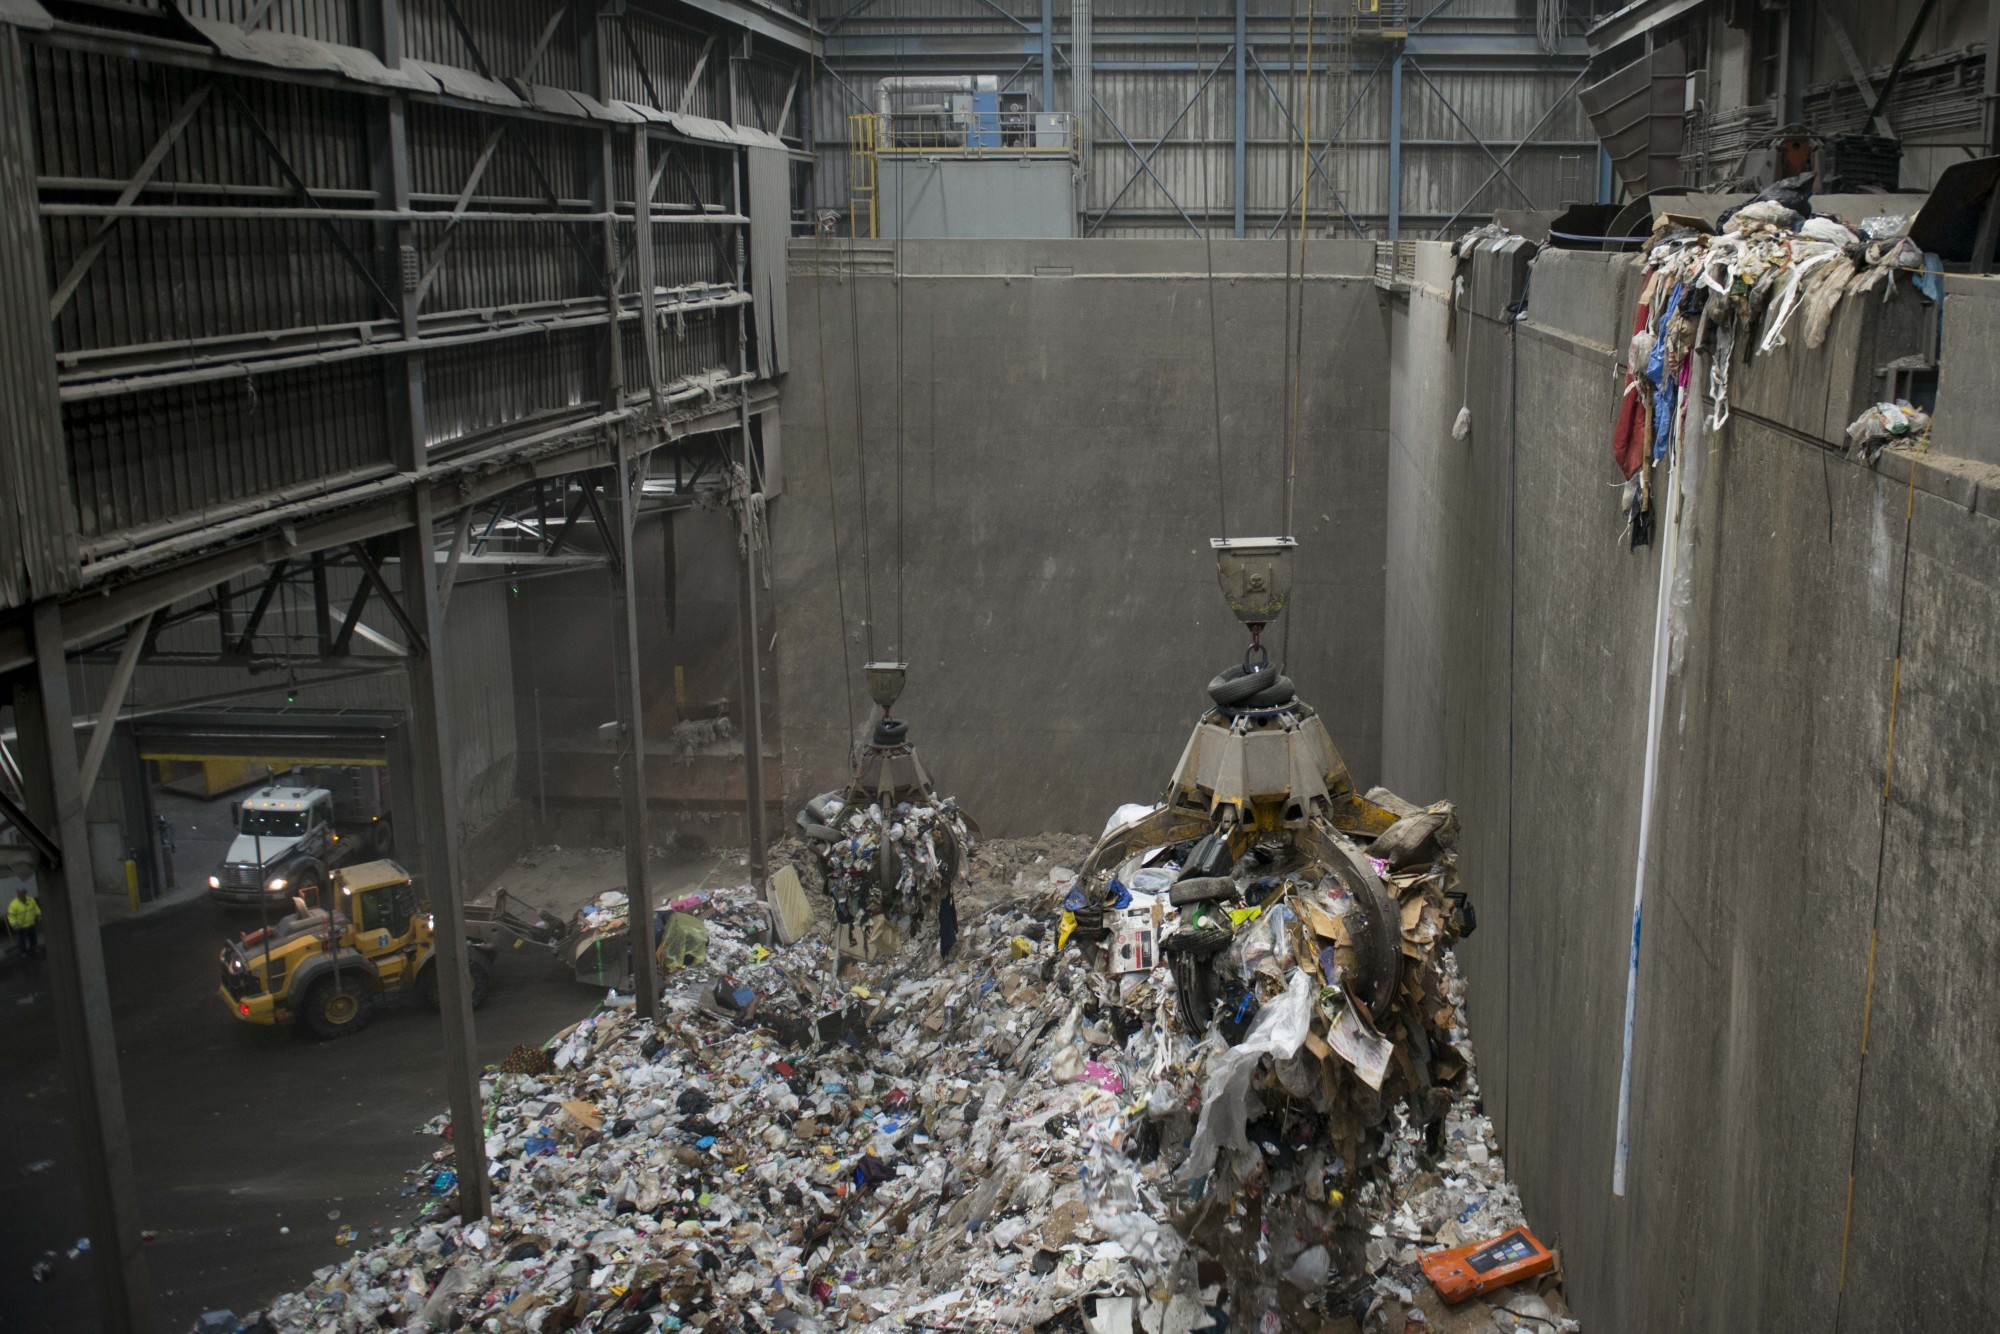 A crane picks up trash to be distributed in bins and transported to the incinerator at the Hennepin Energy Recovery Center in Minneapolis on Wednesday, Dec. 4.